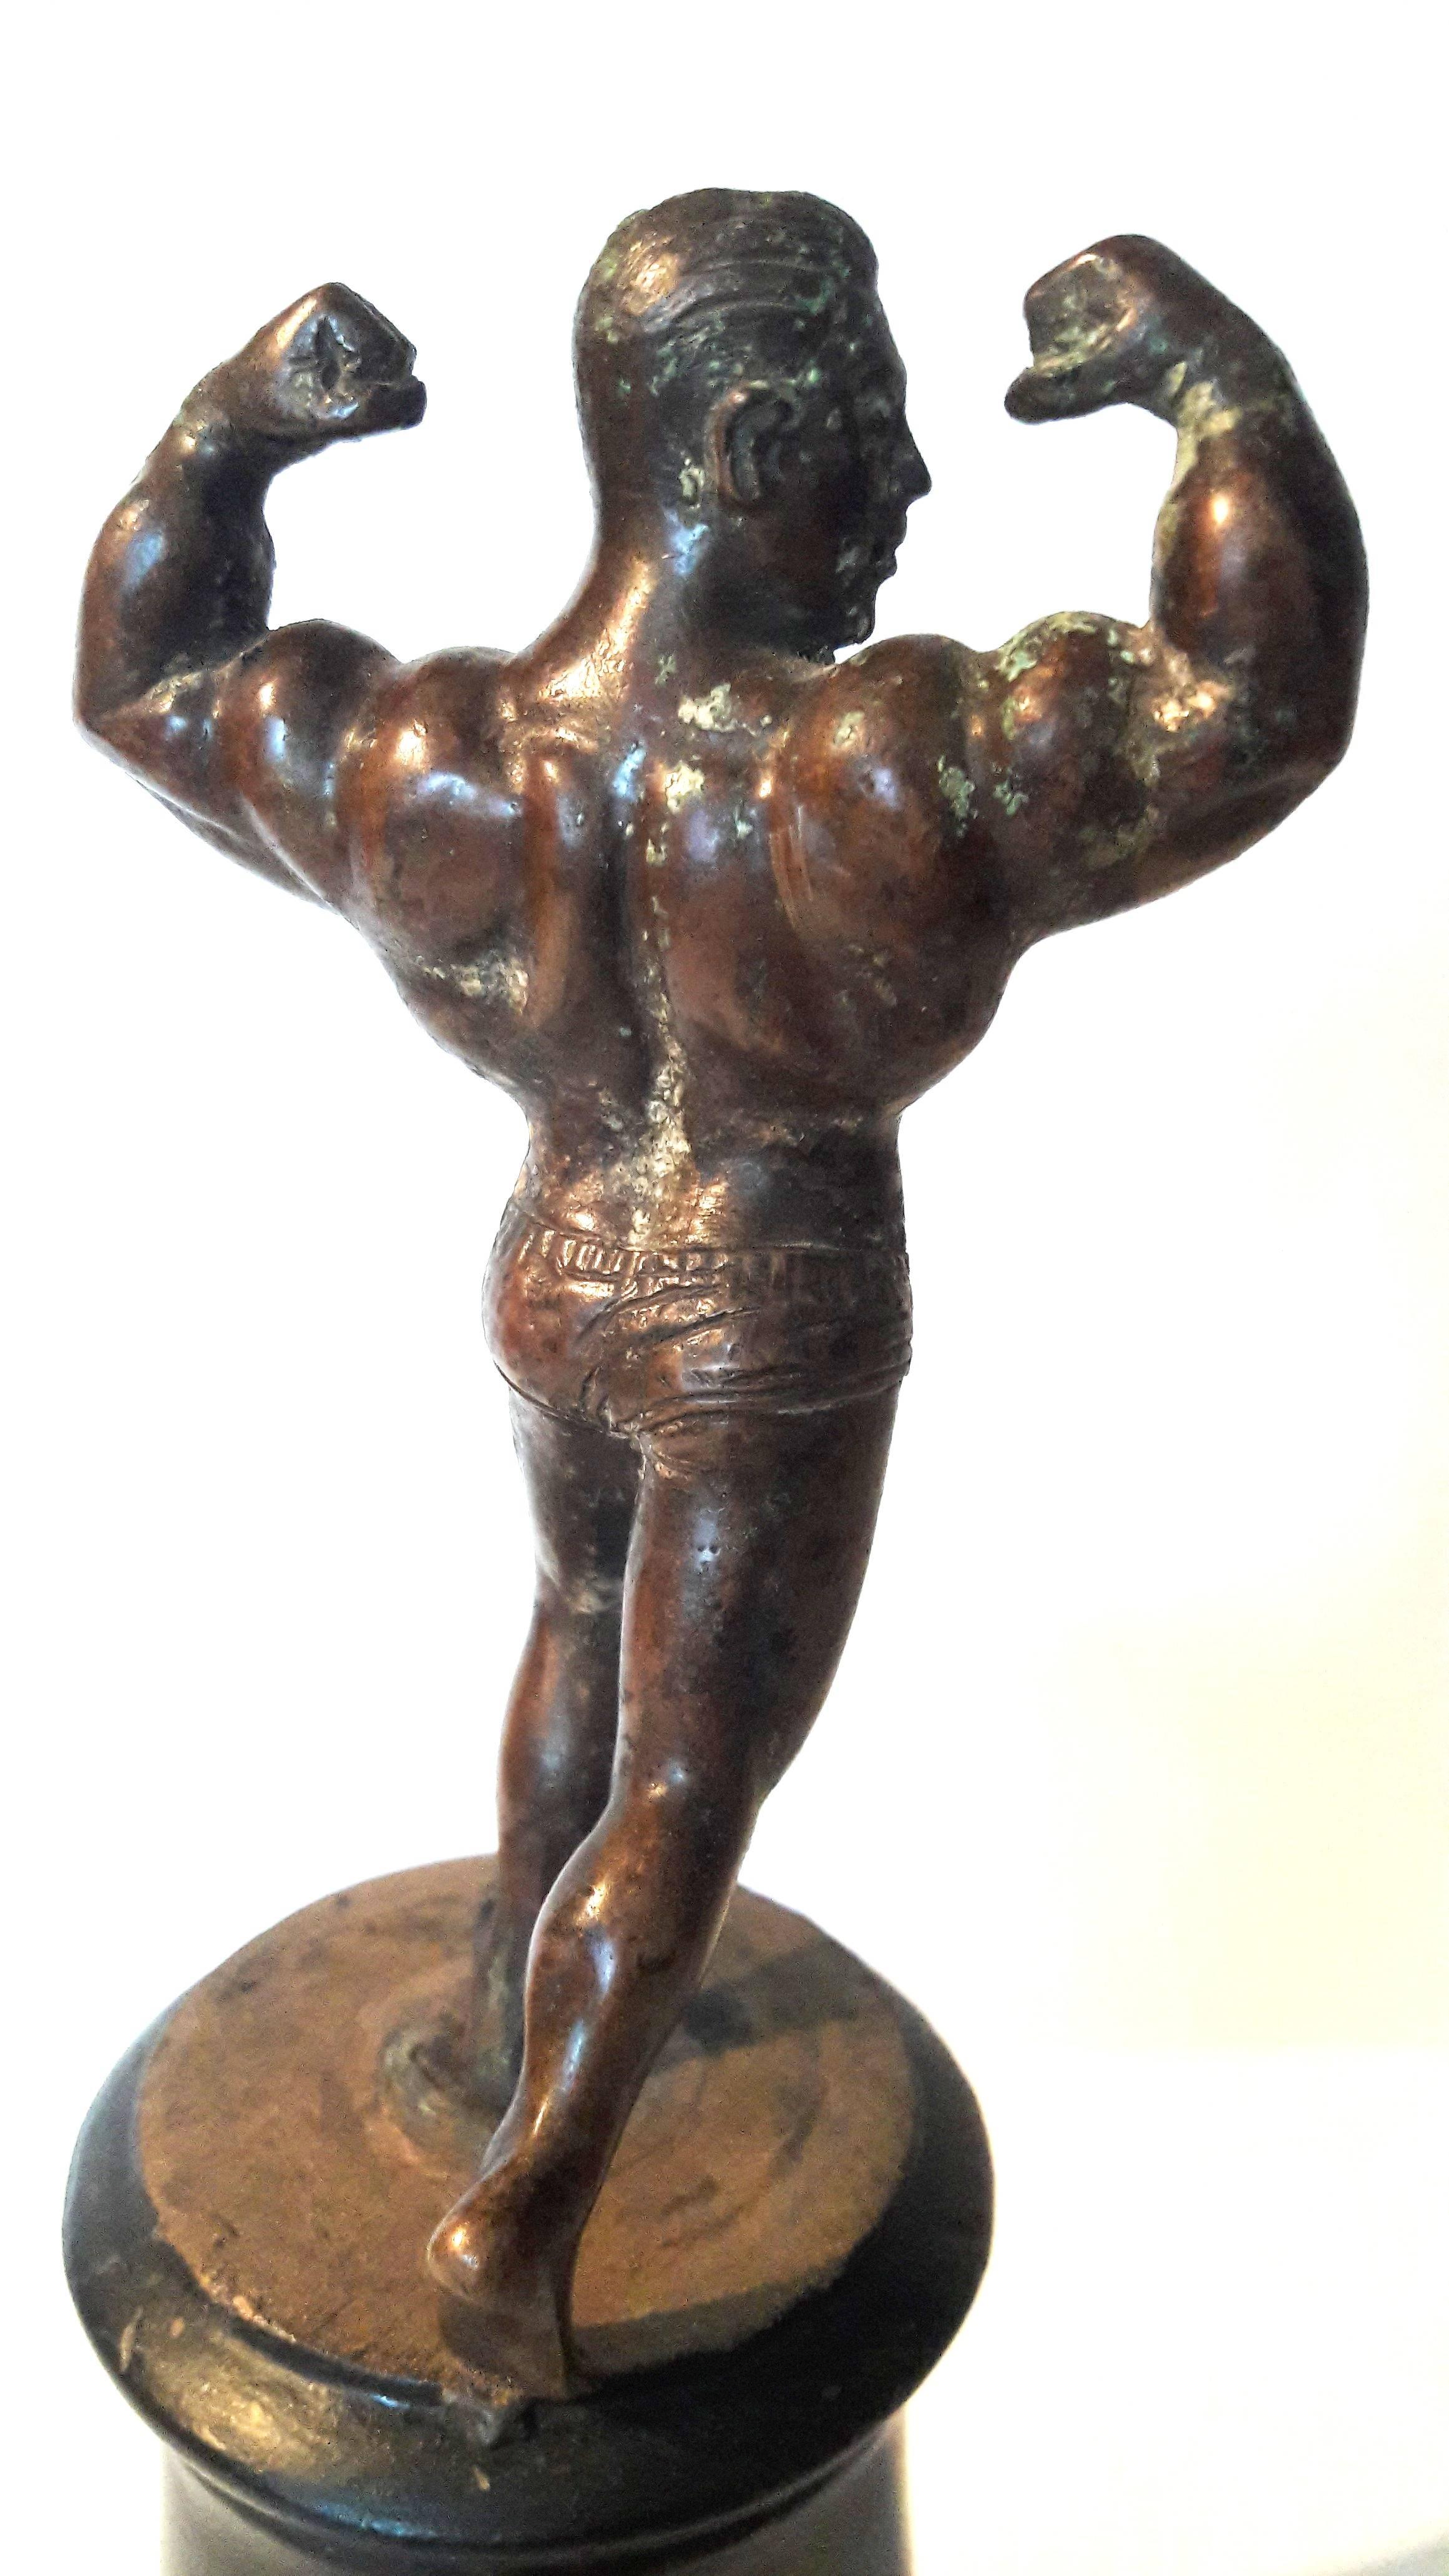 A small bronze muscle man statue on a black wooden base.
Measures: 9 1/2